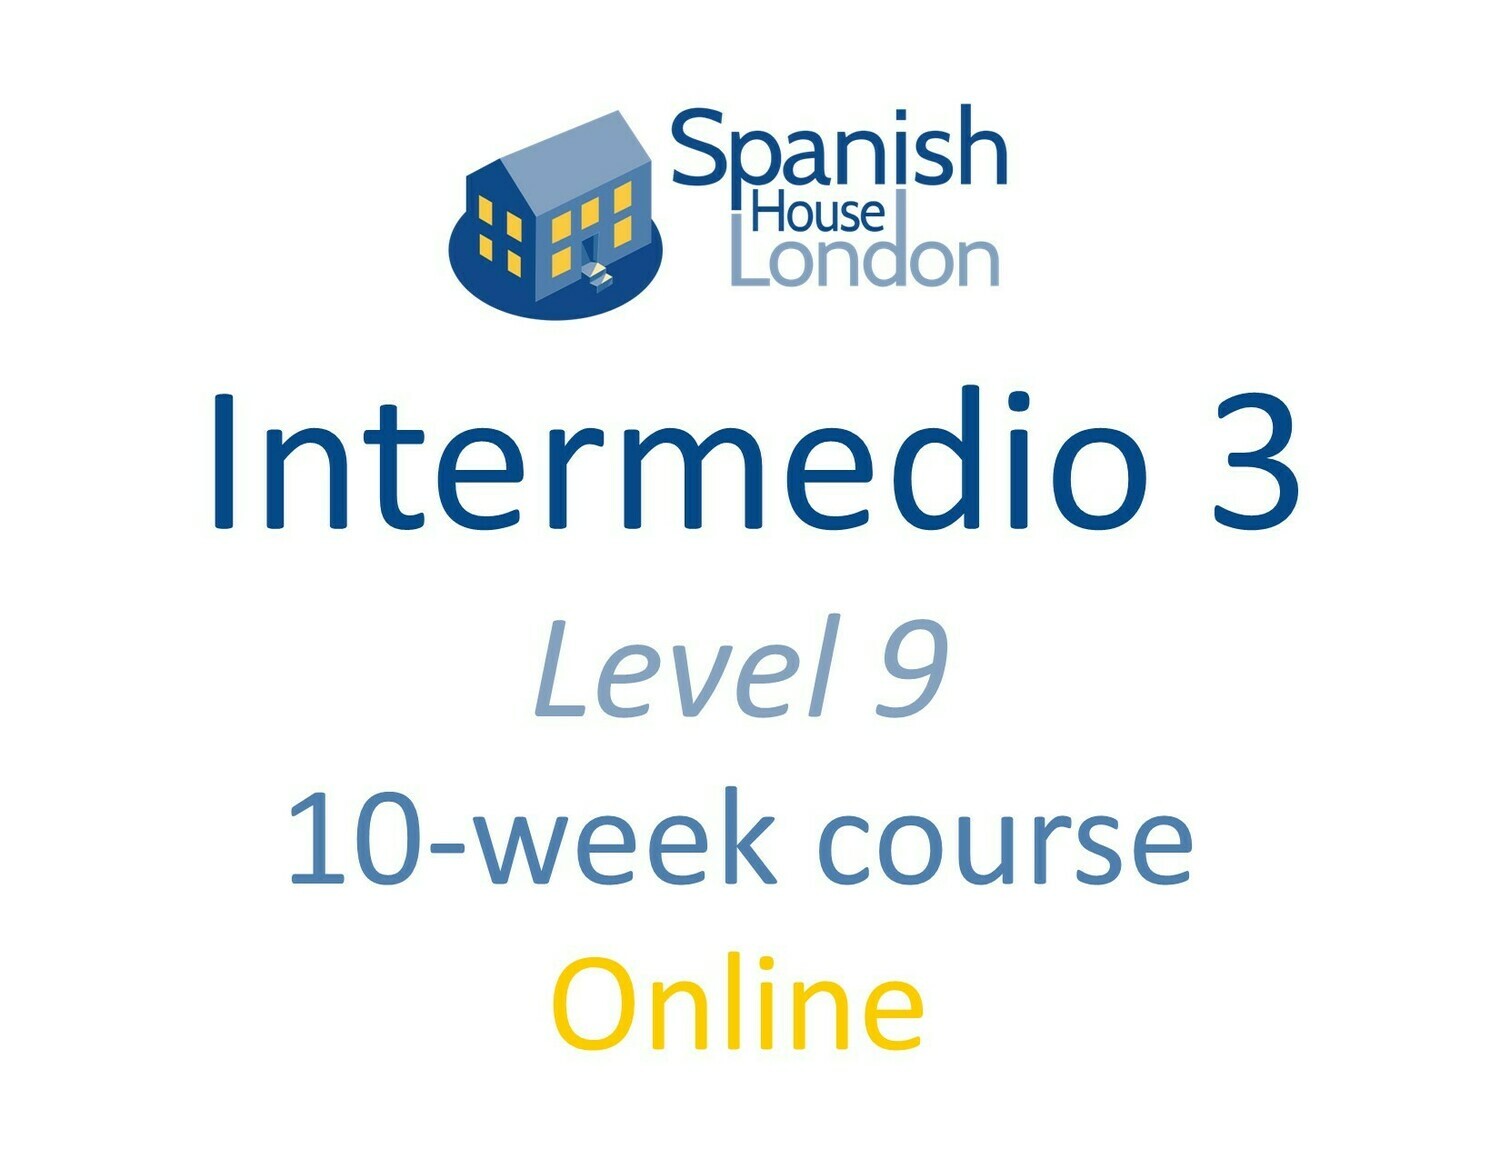 Intermedio 3 Course starting on 25th May at 6pm